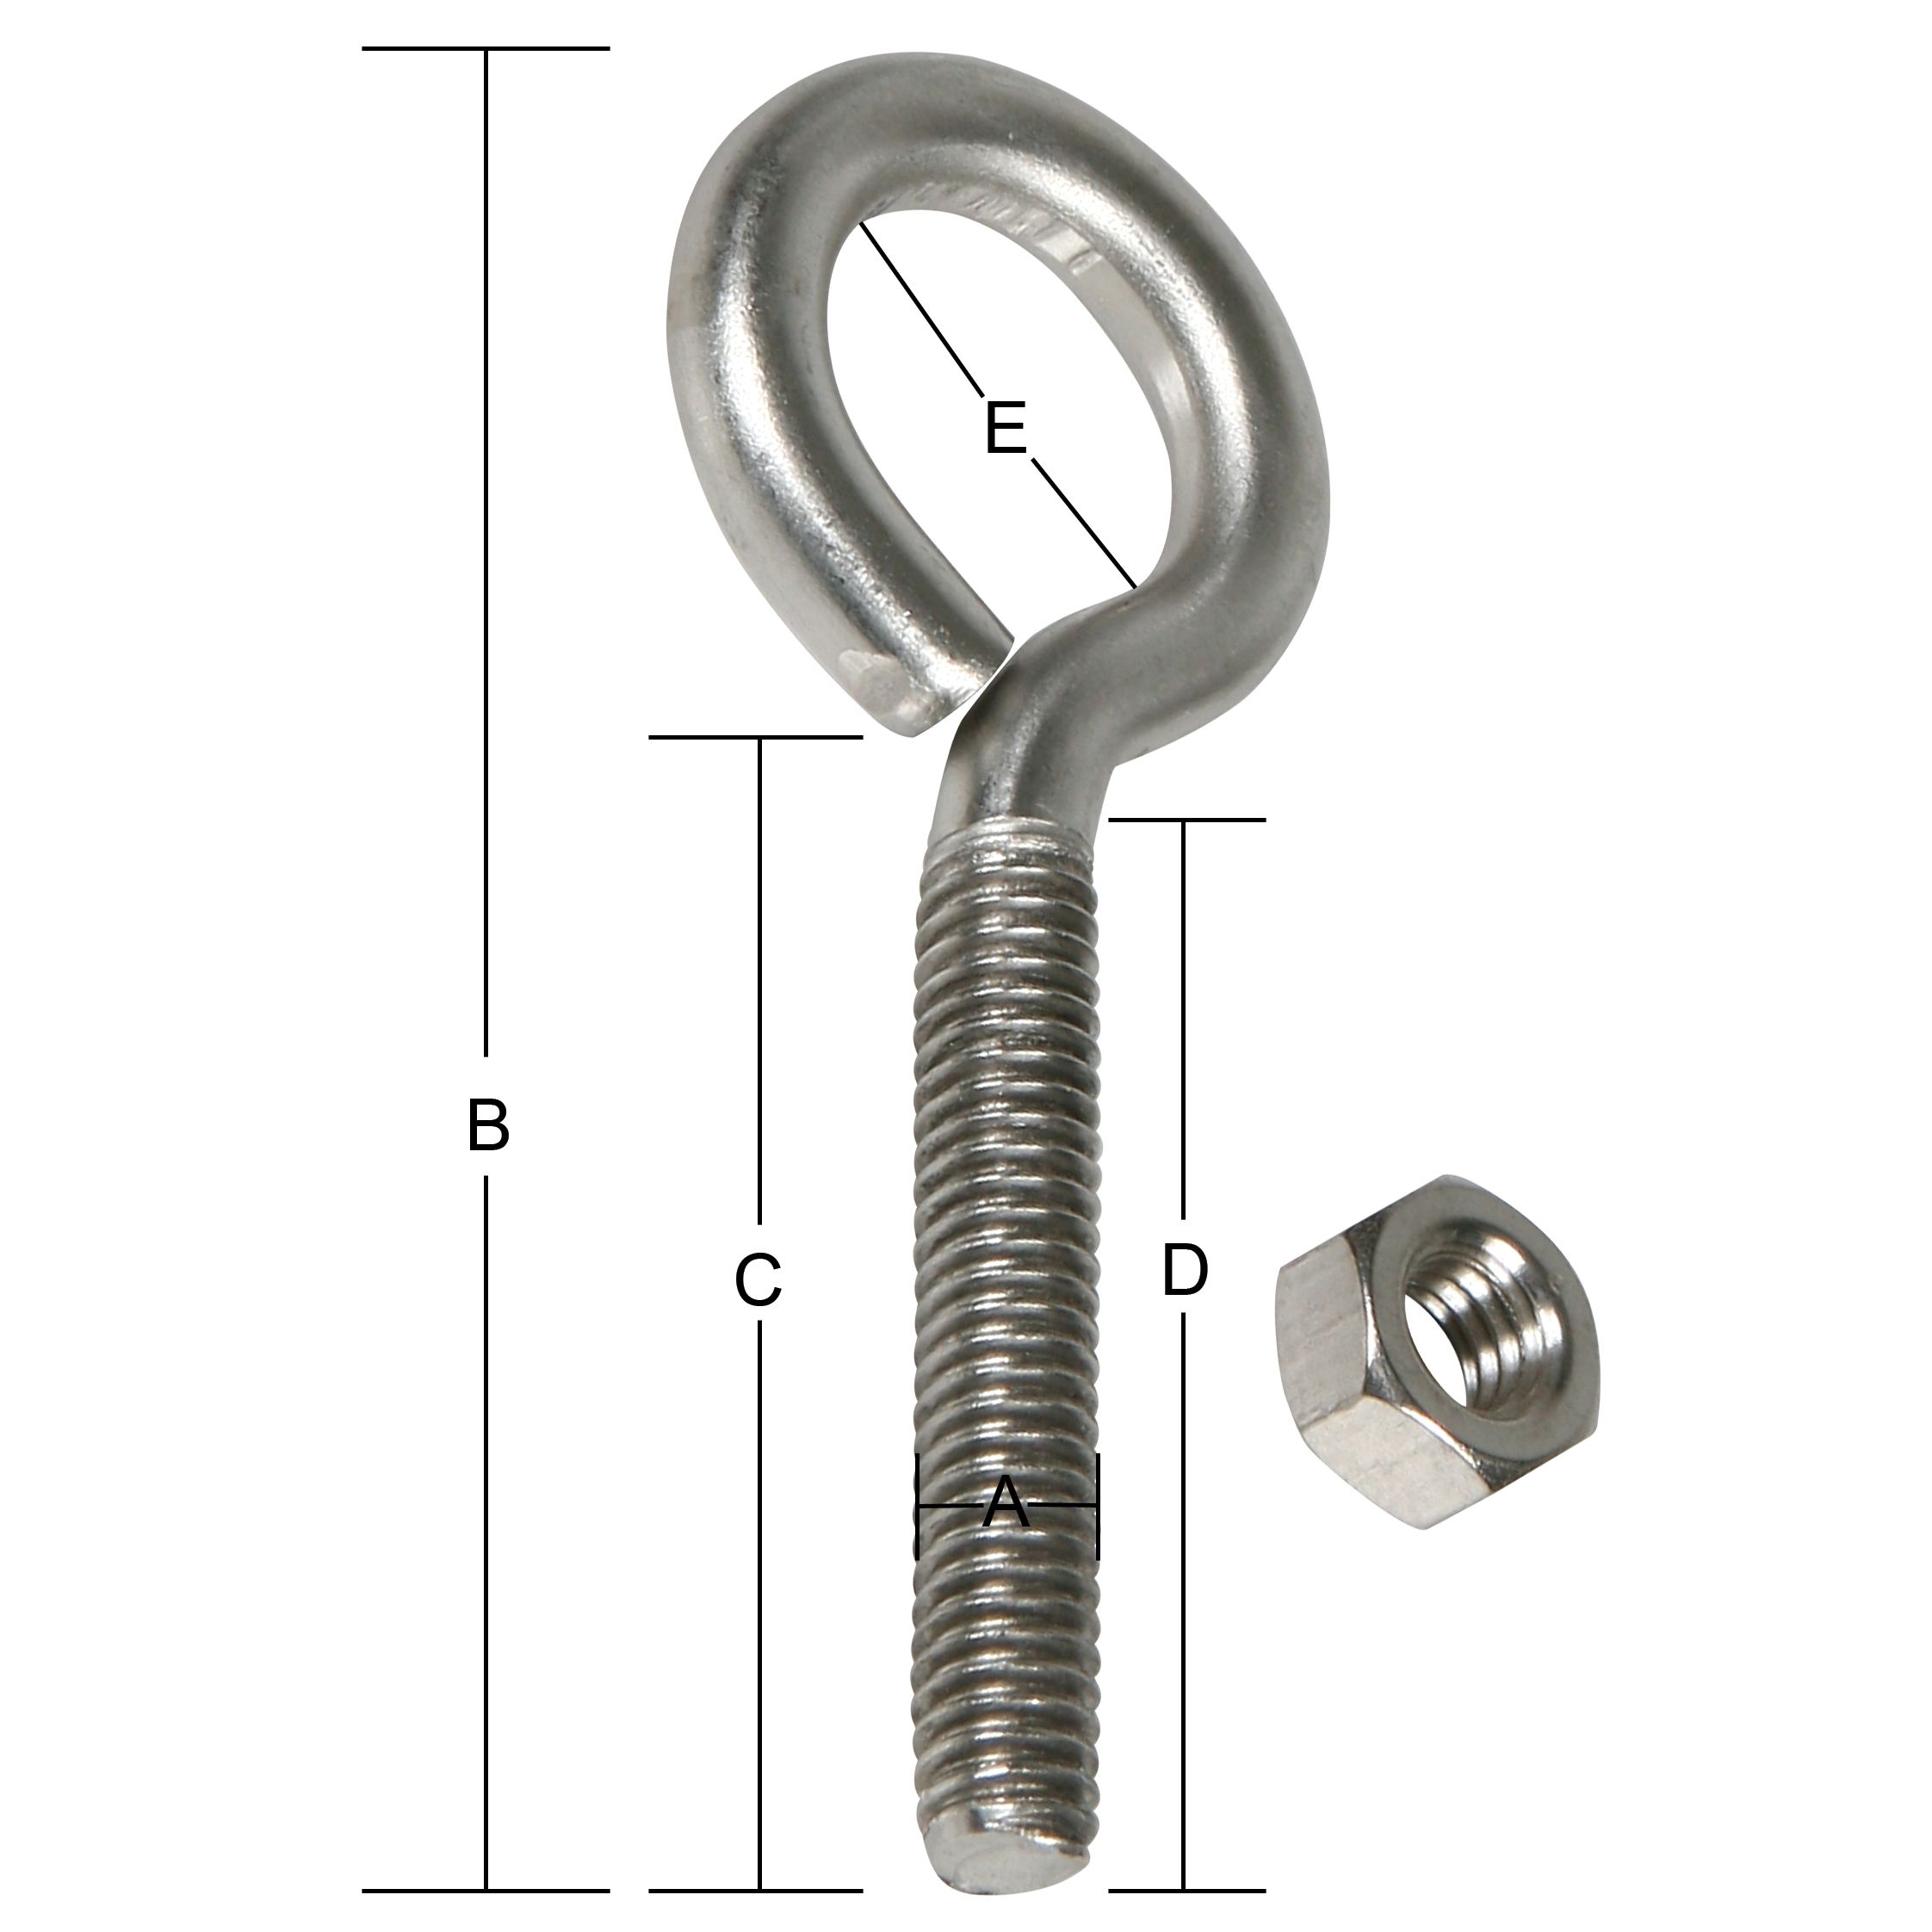 NEW Hindley 10772 3/16" x 2 1/2"  Eye Bolt with nut BOX of 20 